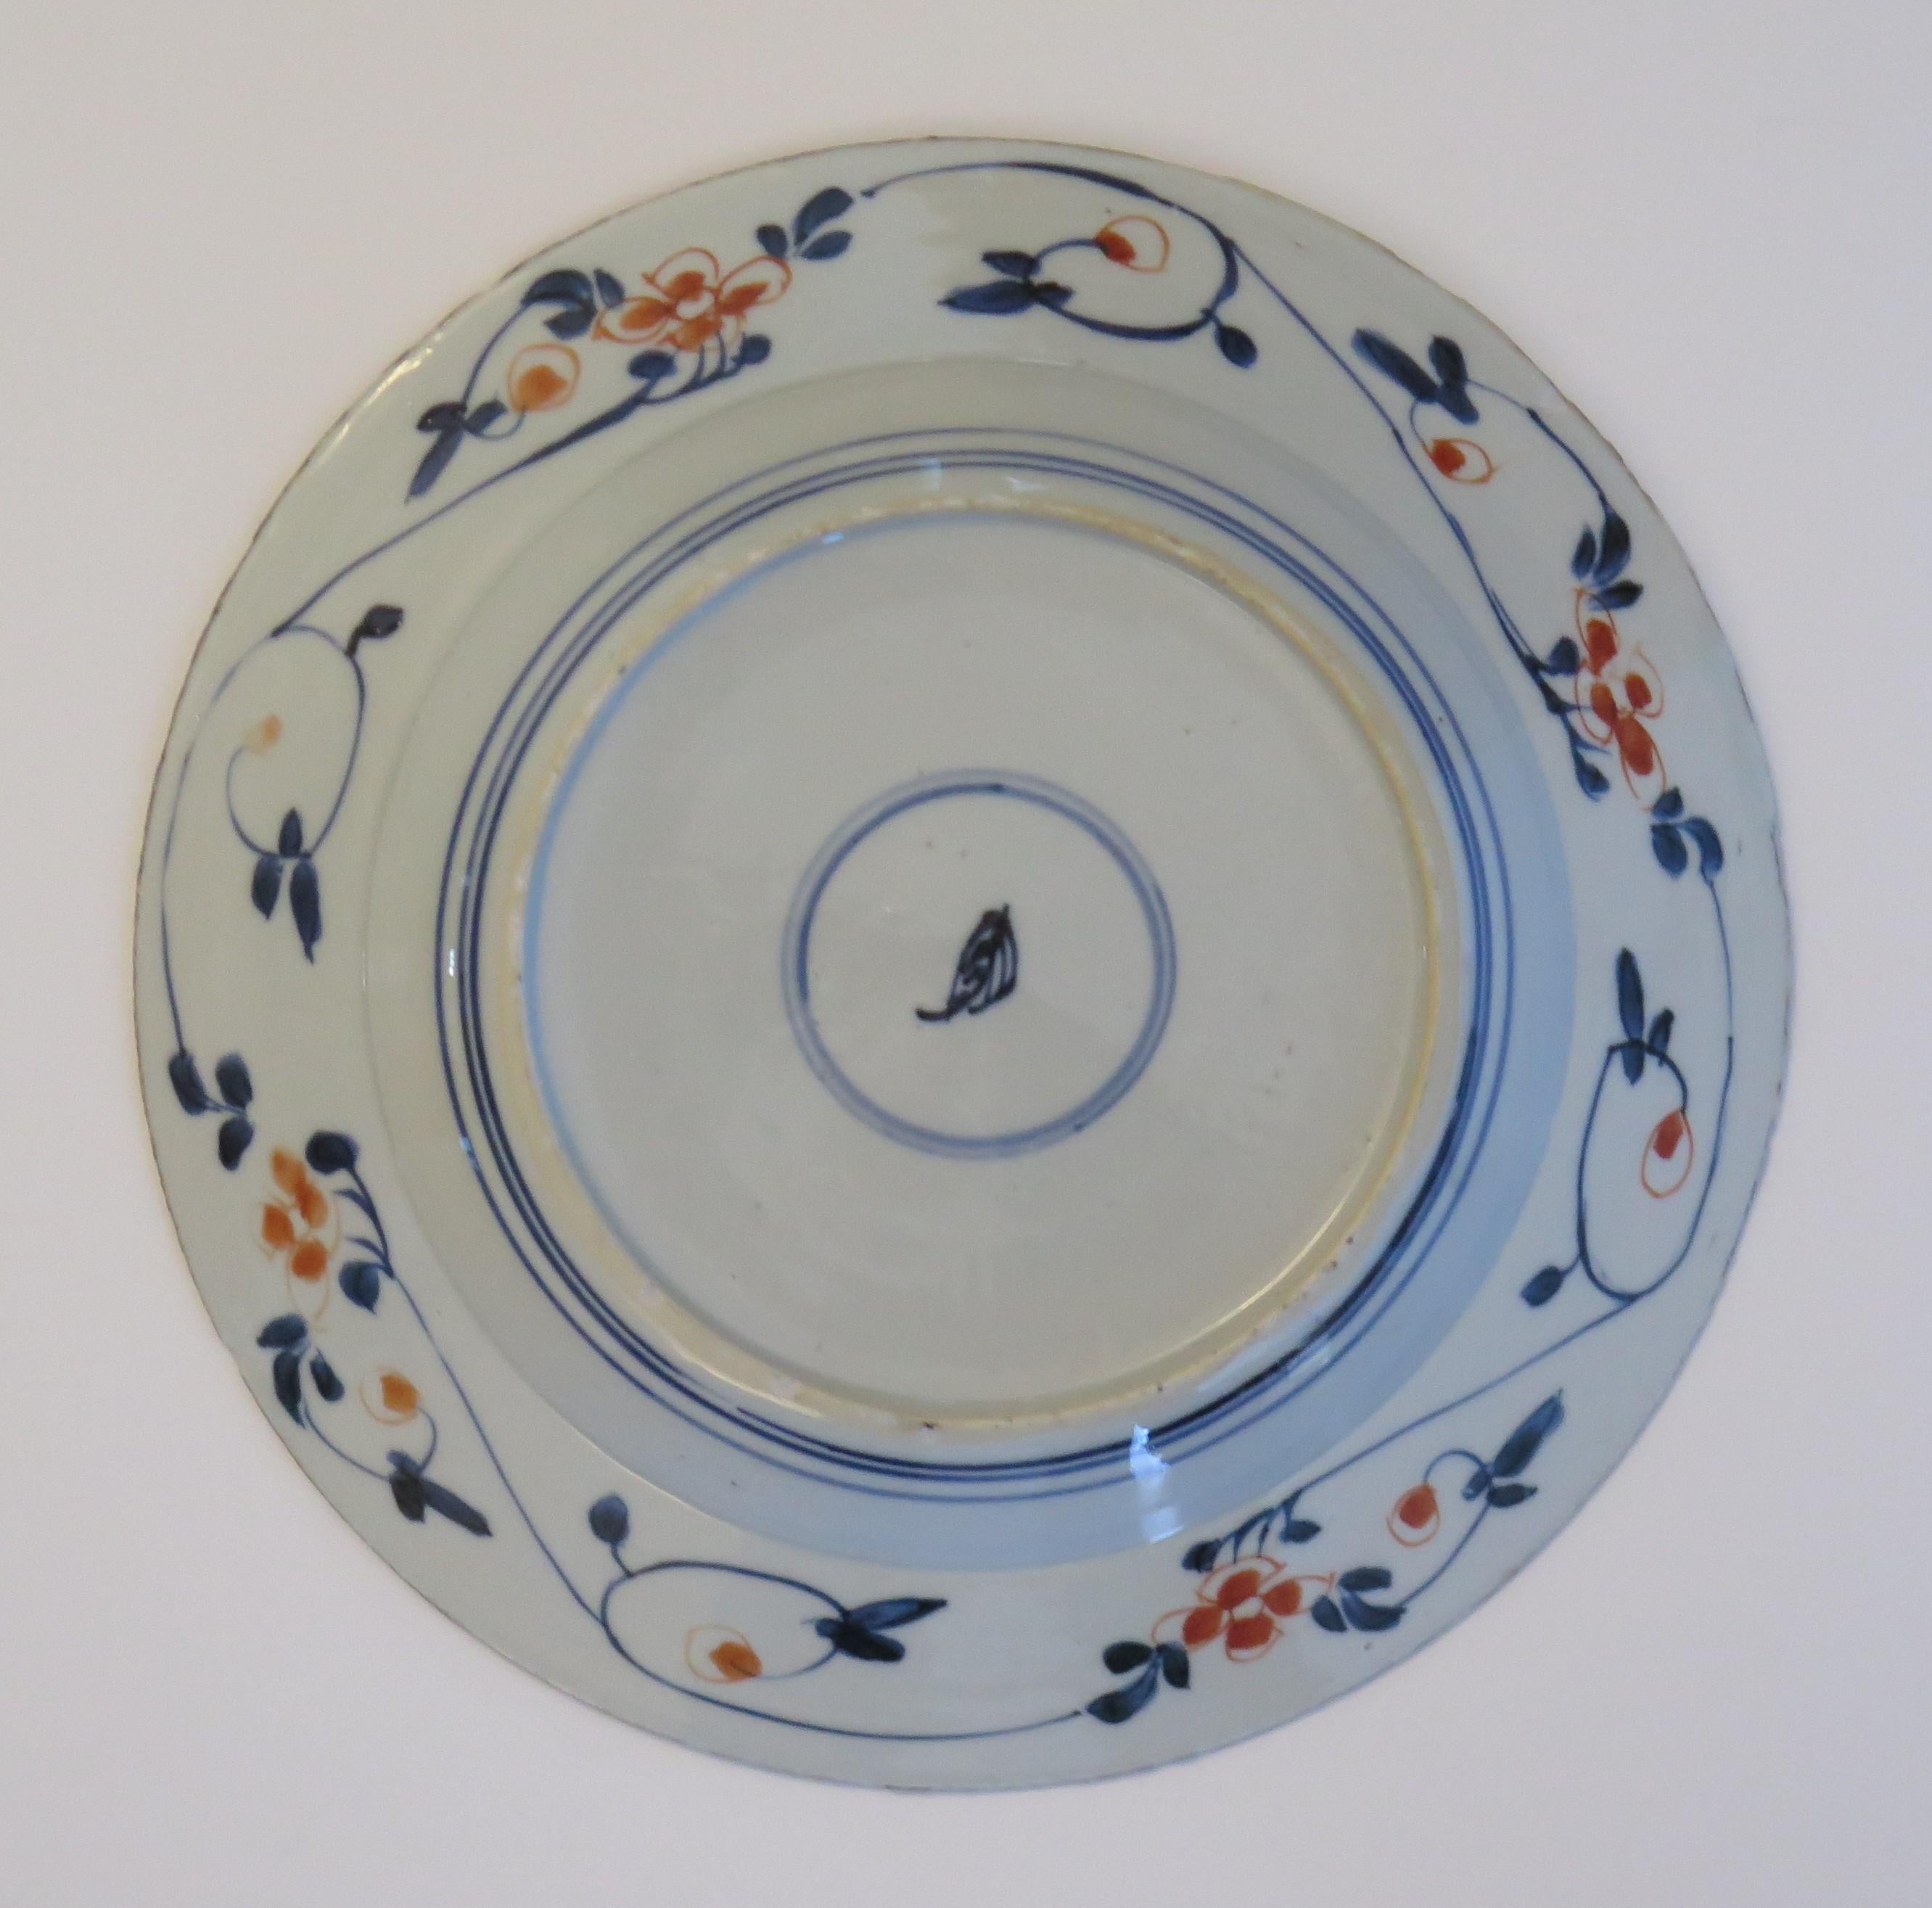 Chinese Porcelain Plate or Bowl Qing Kangxi Mark and Period, Ca 1700 For Sale 1